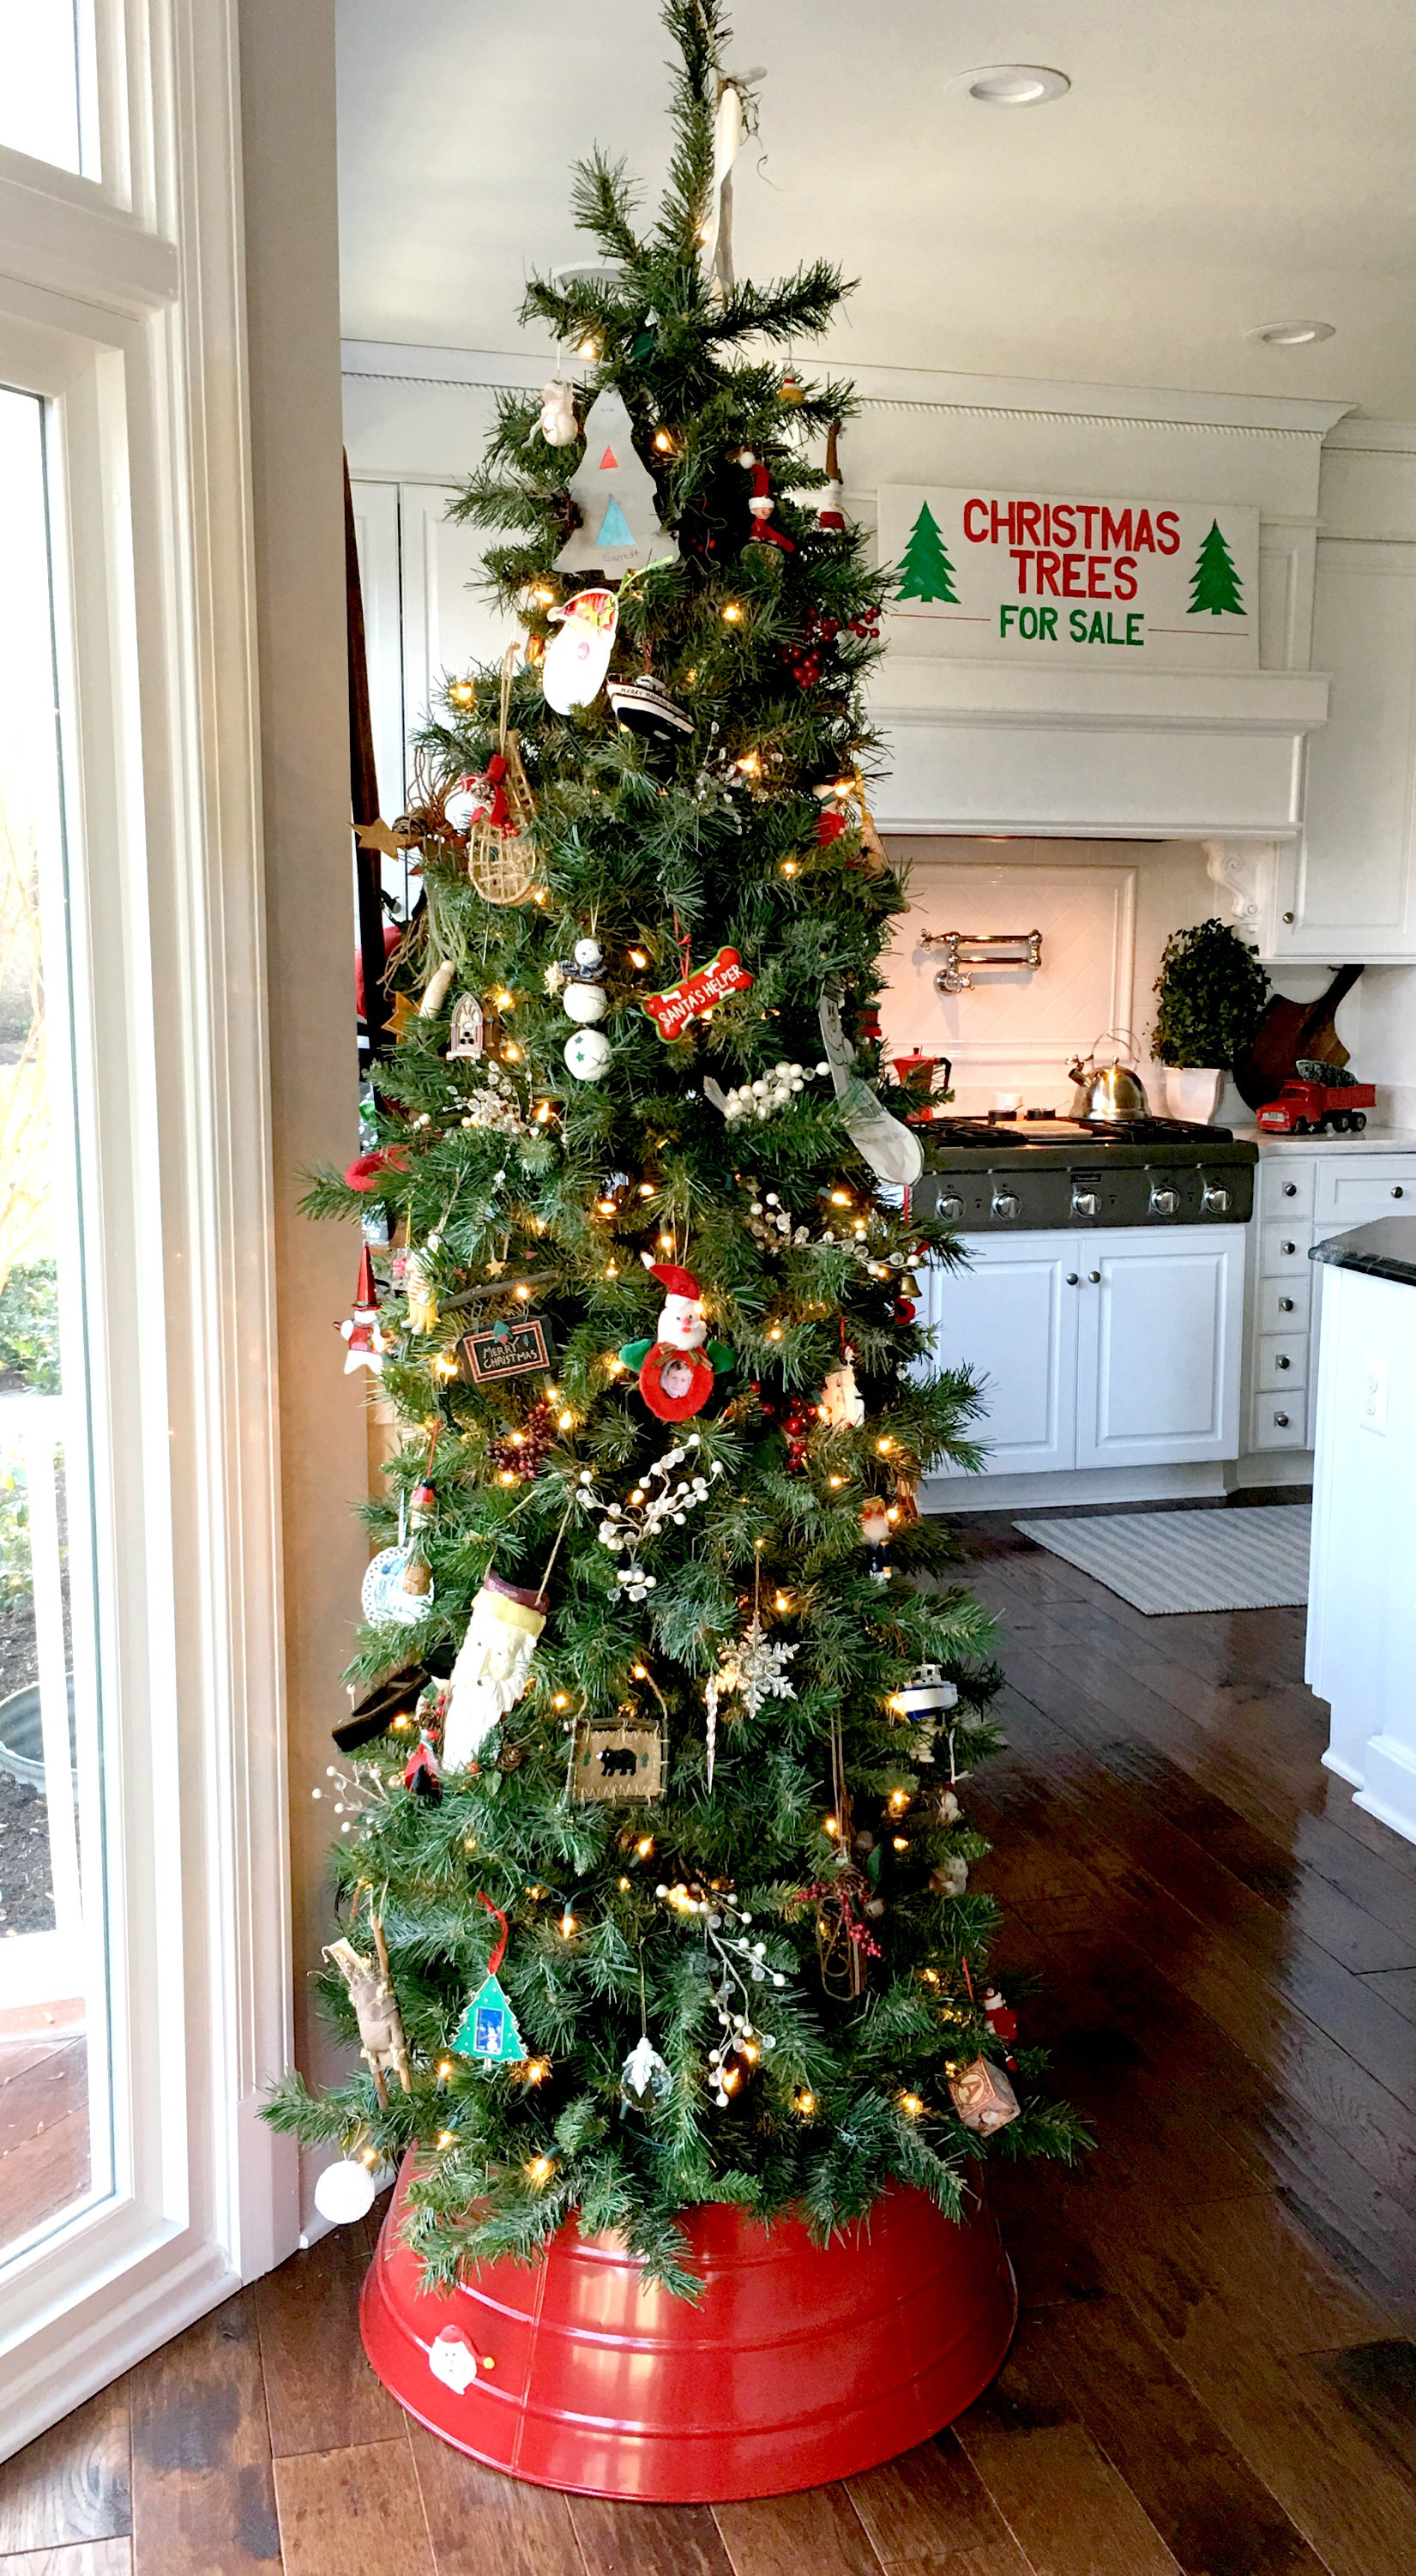 Kitchen Christmas Trees
 Decorating for Christmas in the Kitchen Stylish Revamp